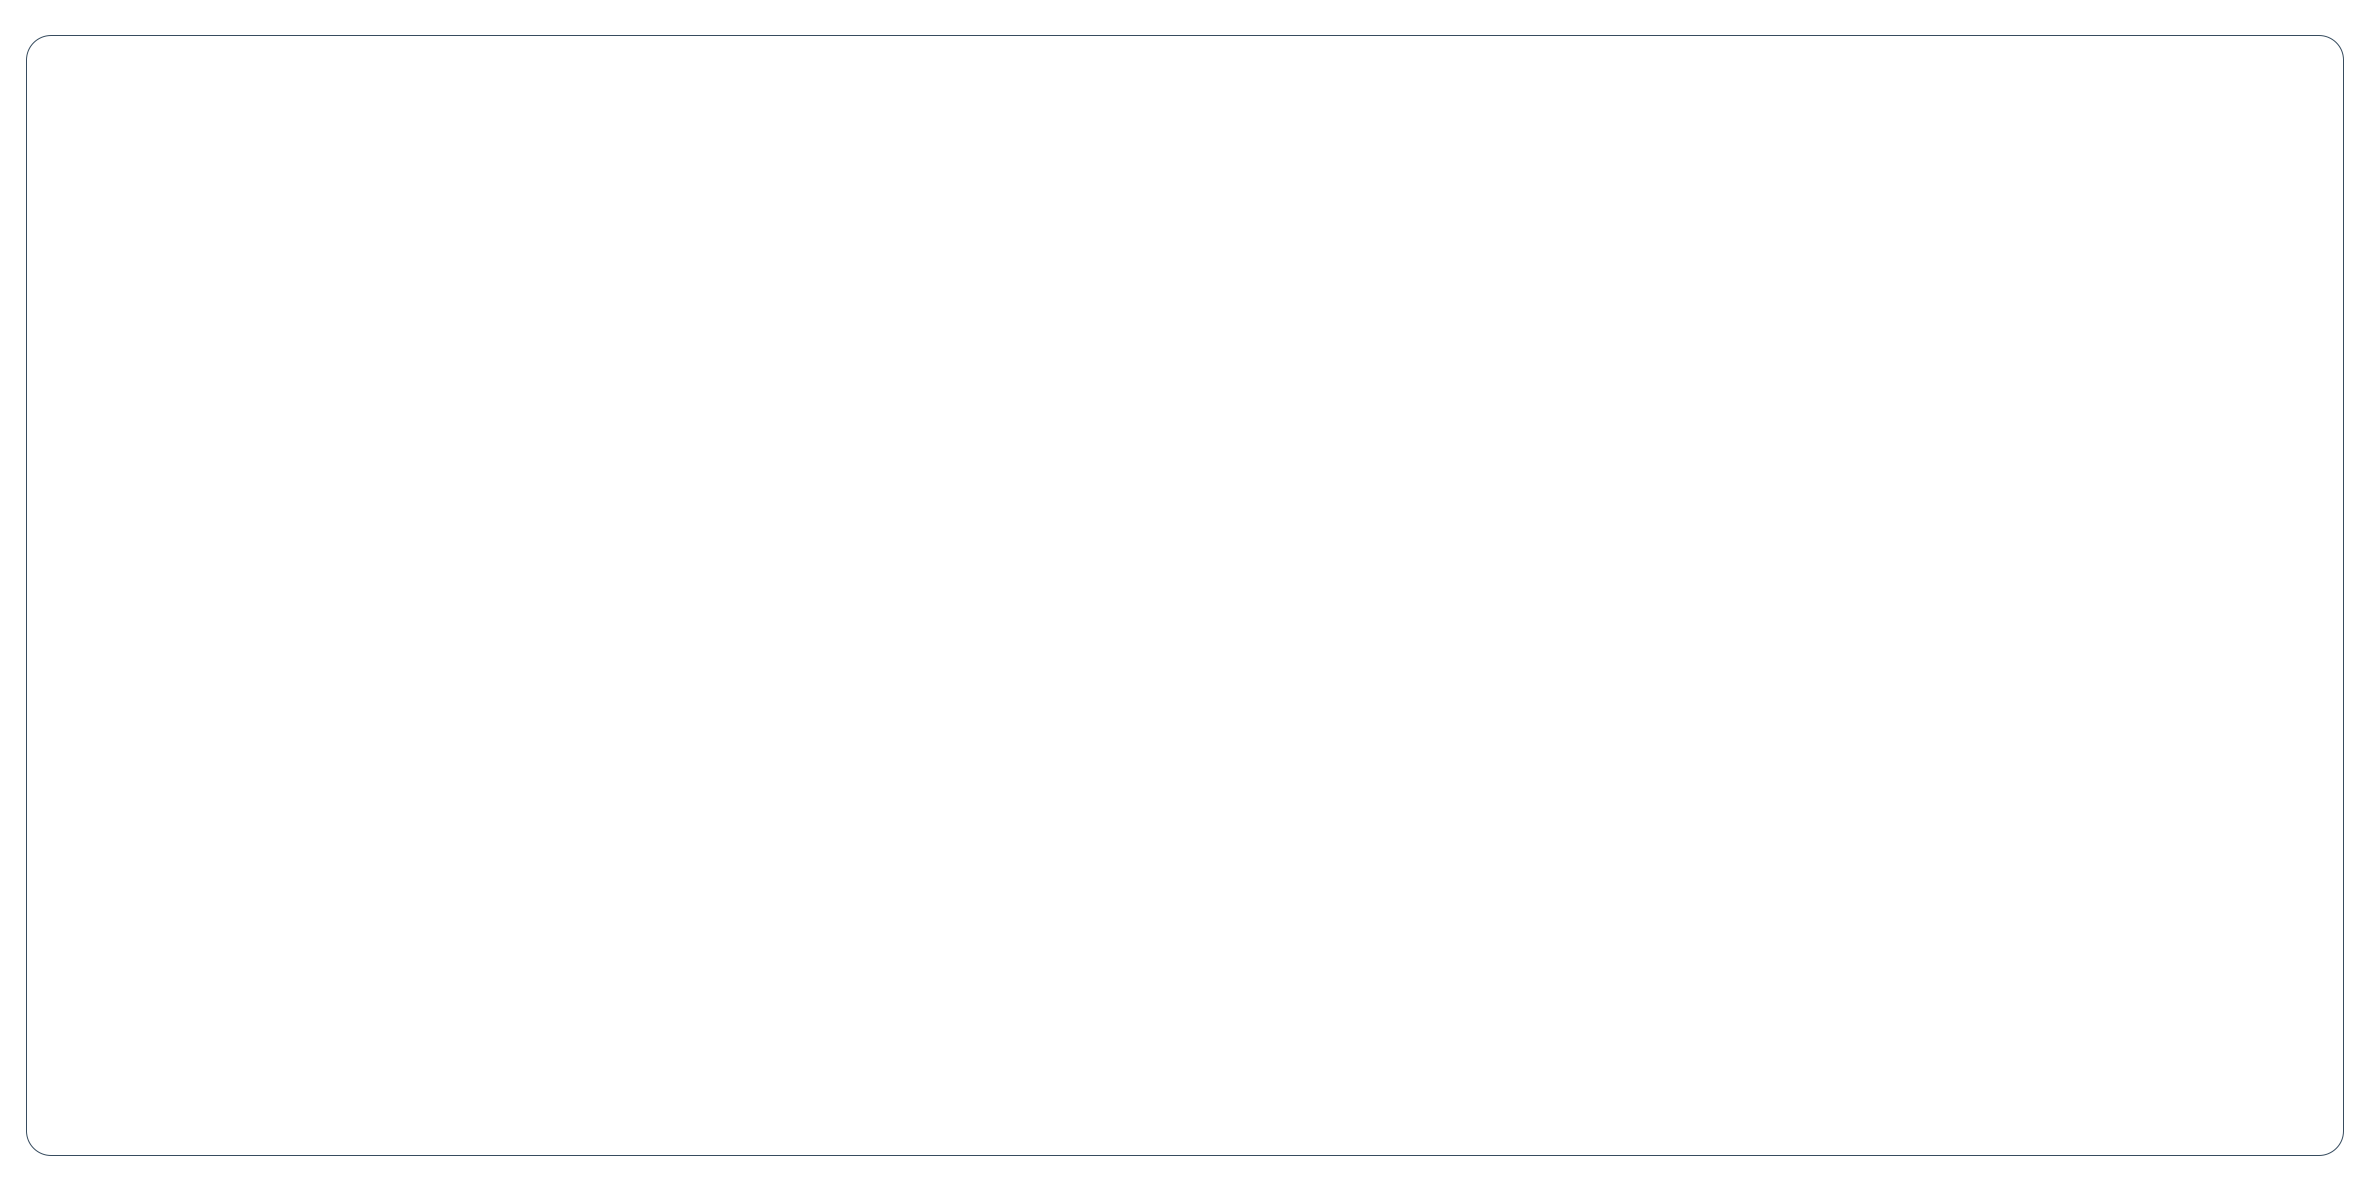 pinch magic fiber wicked reports accurate marketing attribution subscription ecommerce